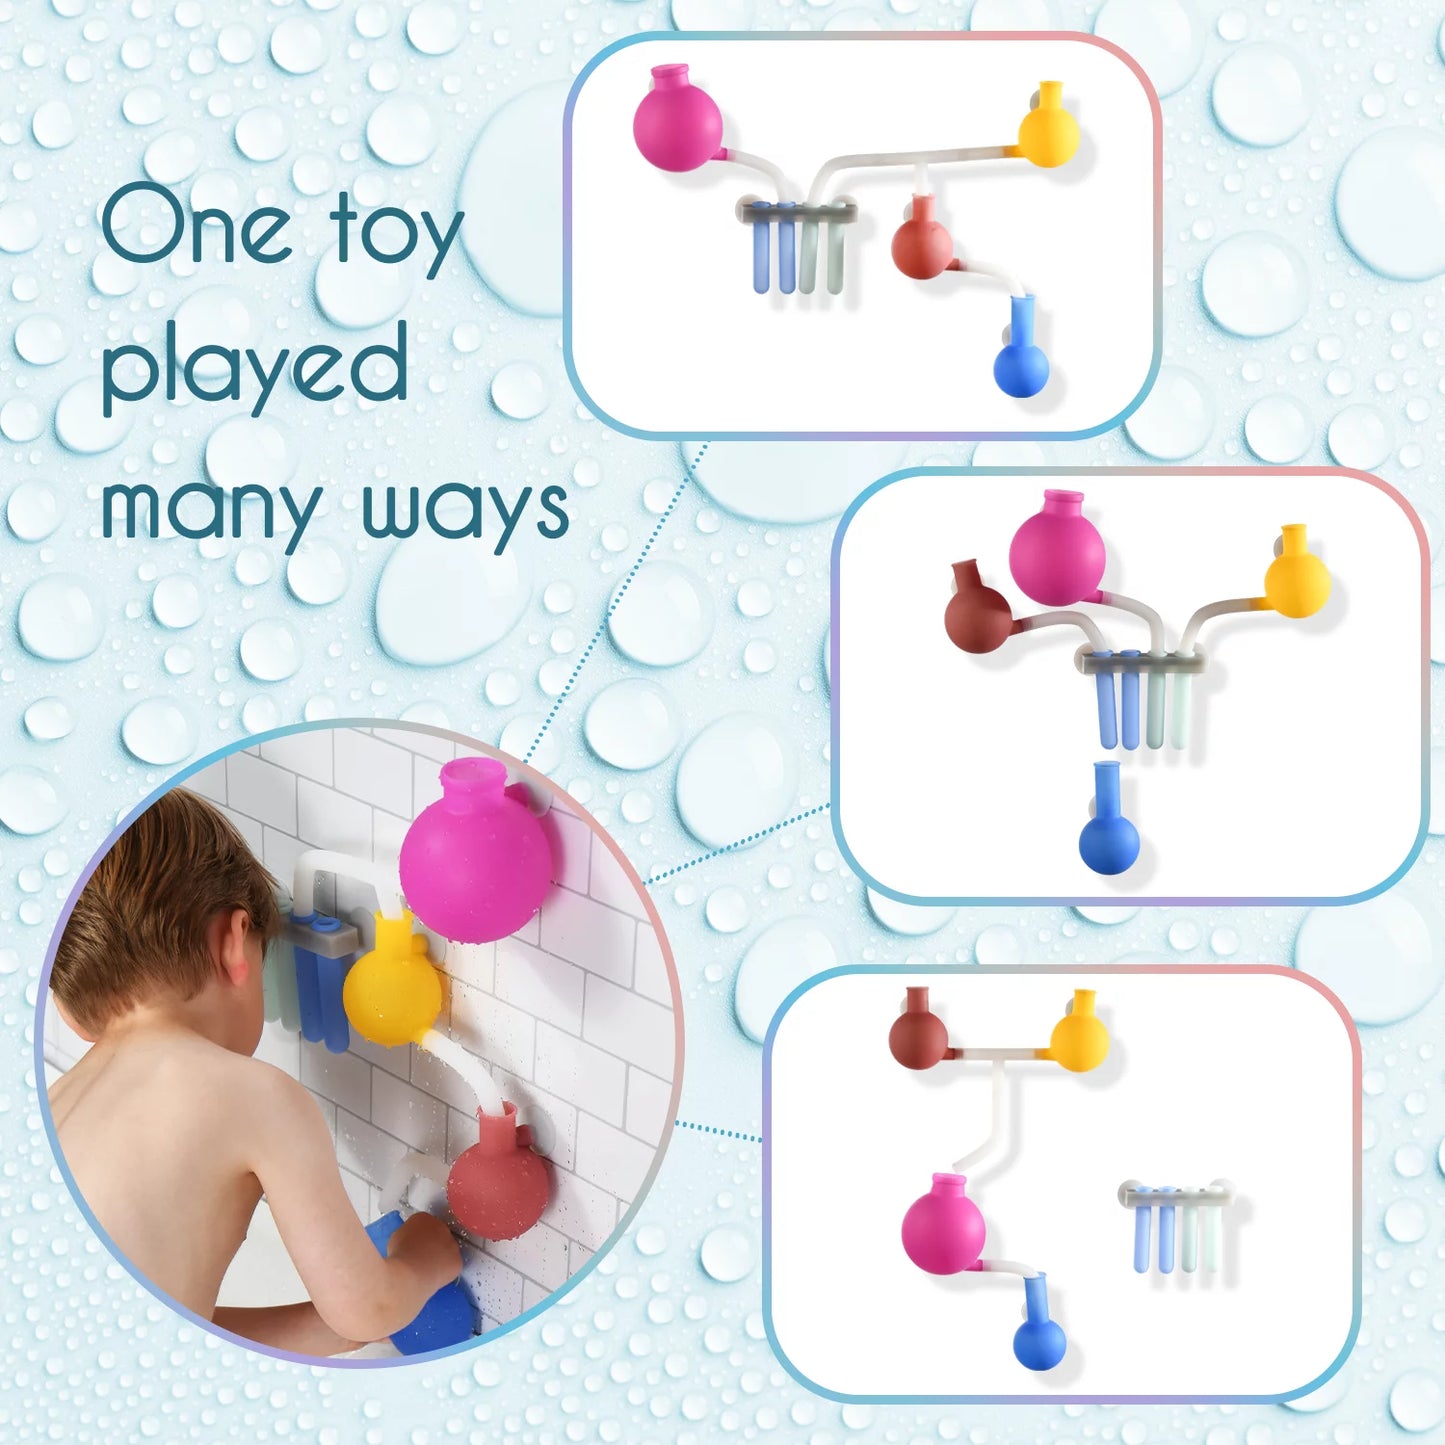 - Aqualab Science Themed Silicone Bath Toy for Kids 4-8 Years, Wall Suction Bath Toy